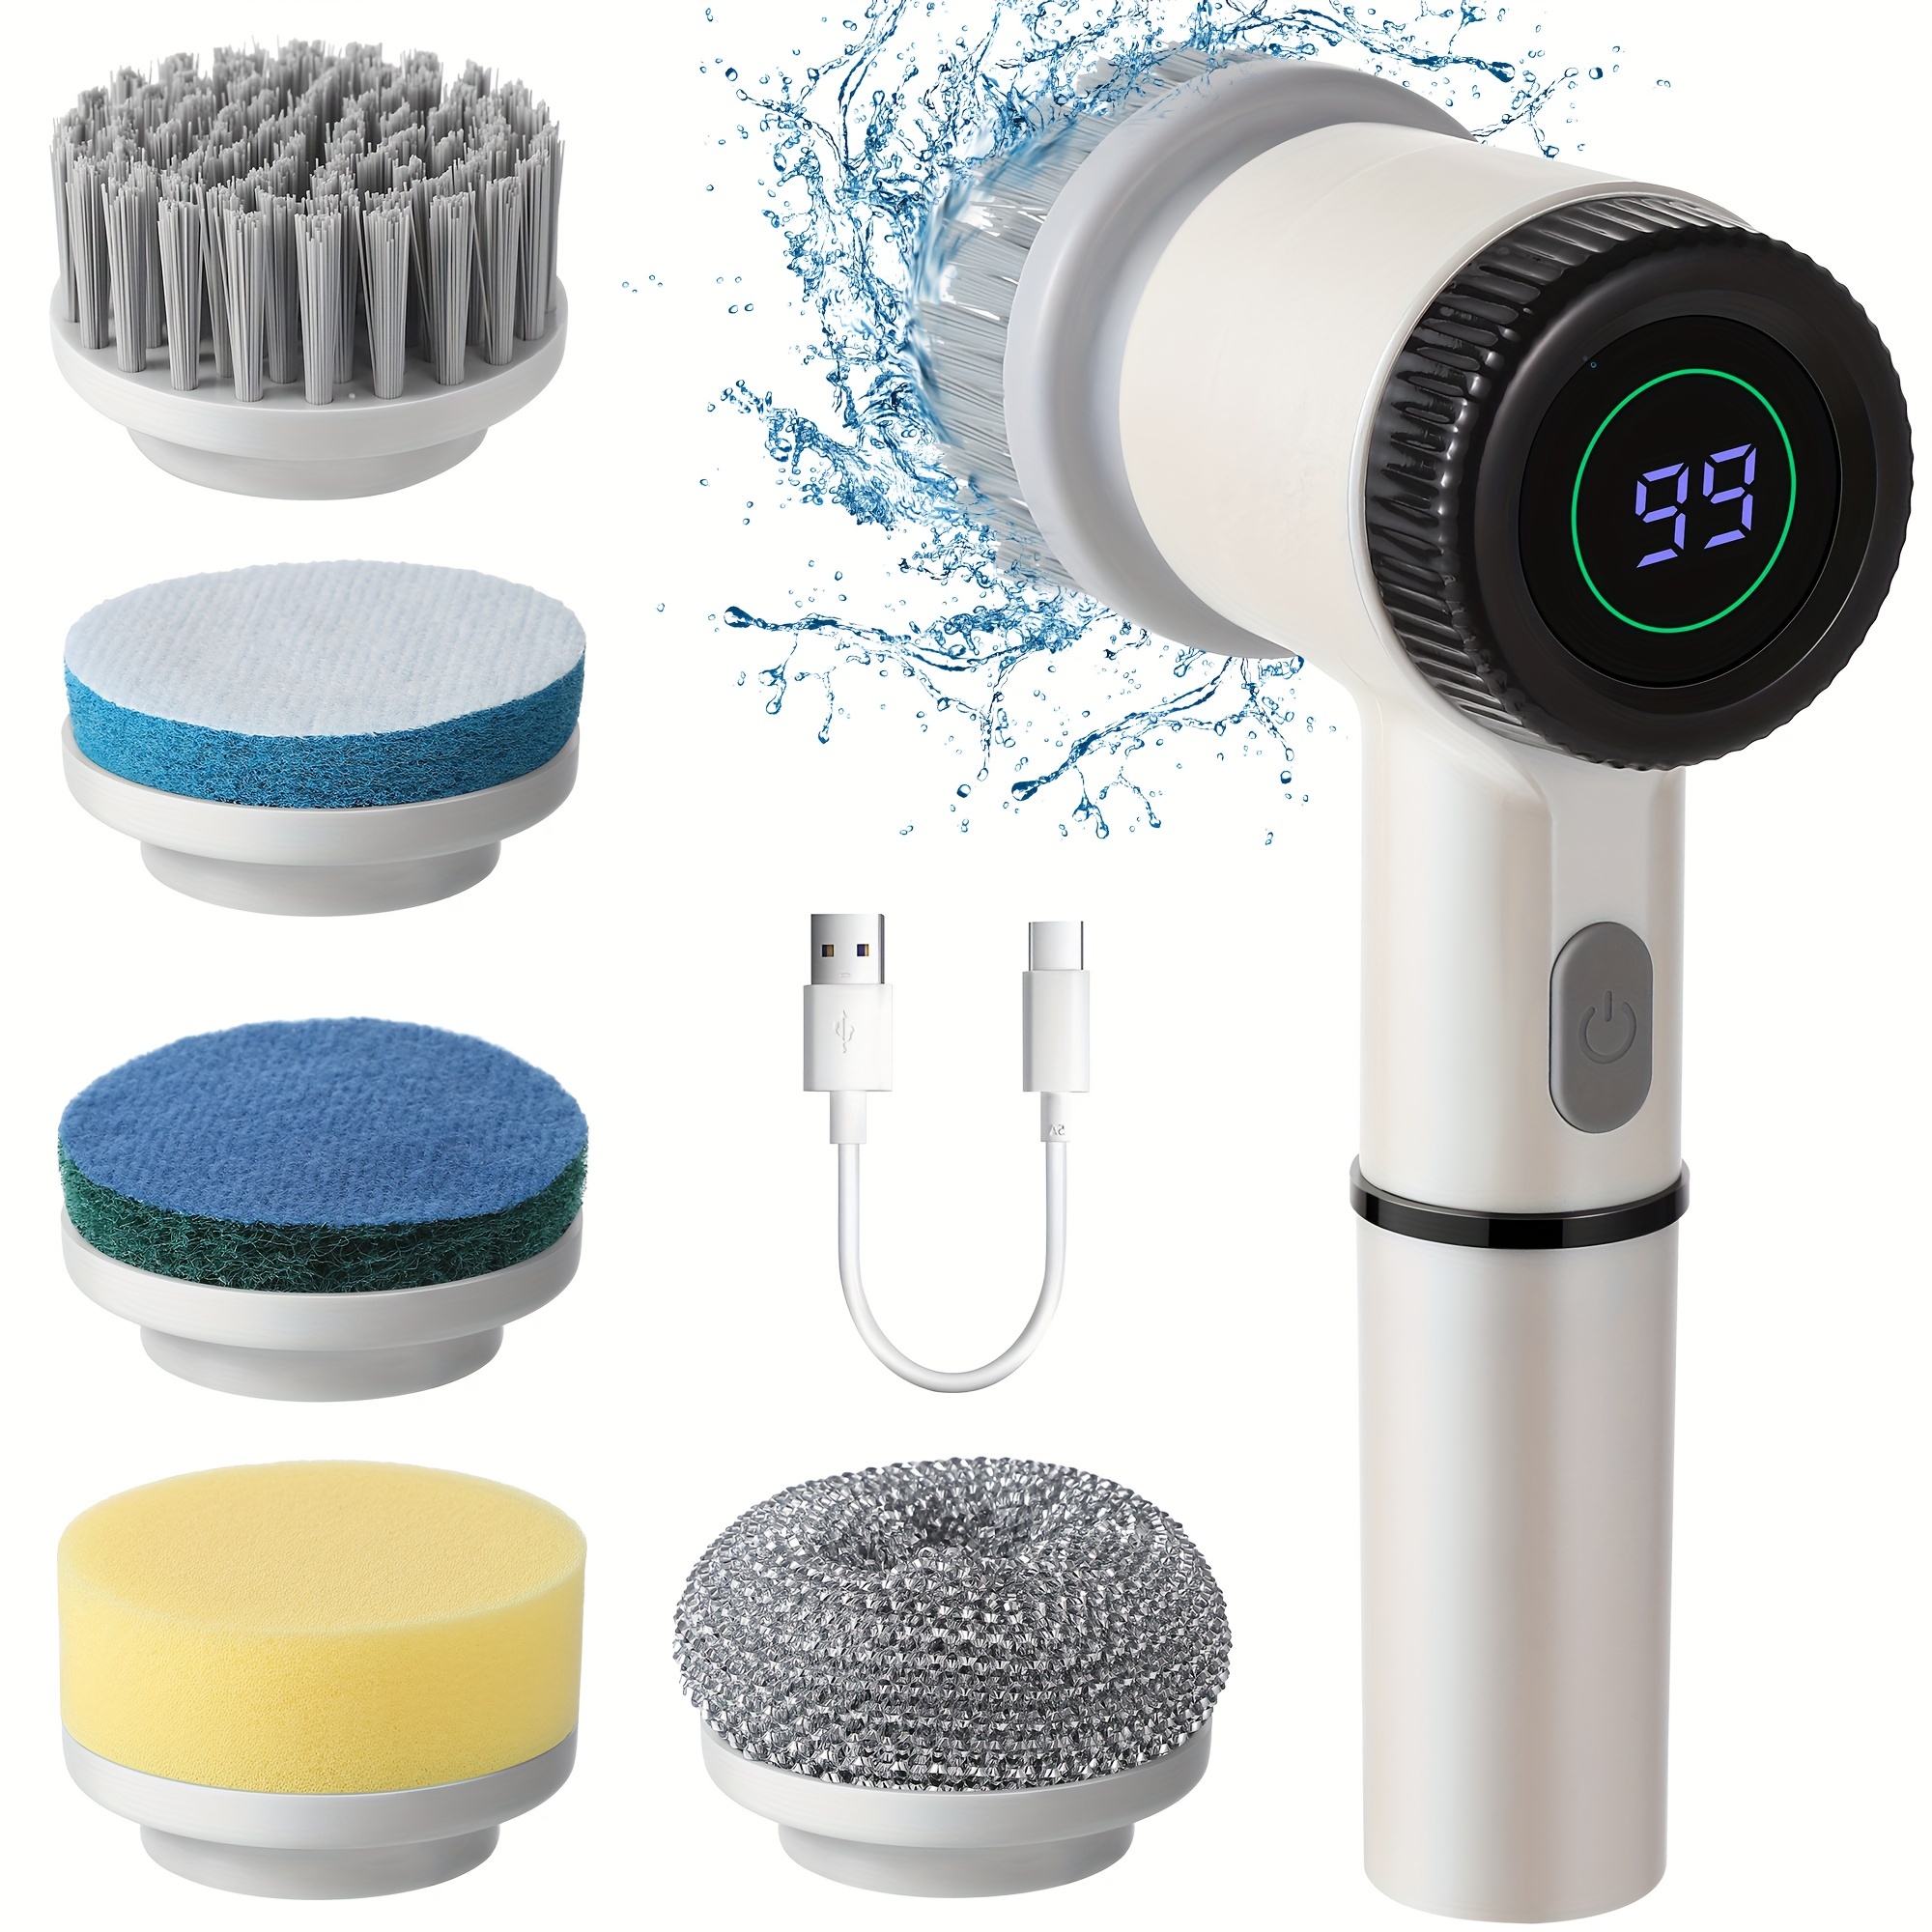 

Set, Electric Spin Scrubber, Rechargeable Scrubber With Battery Level Display, 6 Replaceable Heads, 3 Adjustable Speeds, Electric Cleaning Brush For Tiles, Bathroom, Kitchen, Car, Window